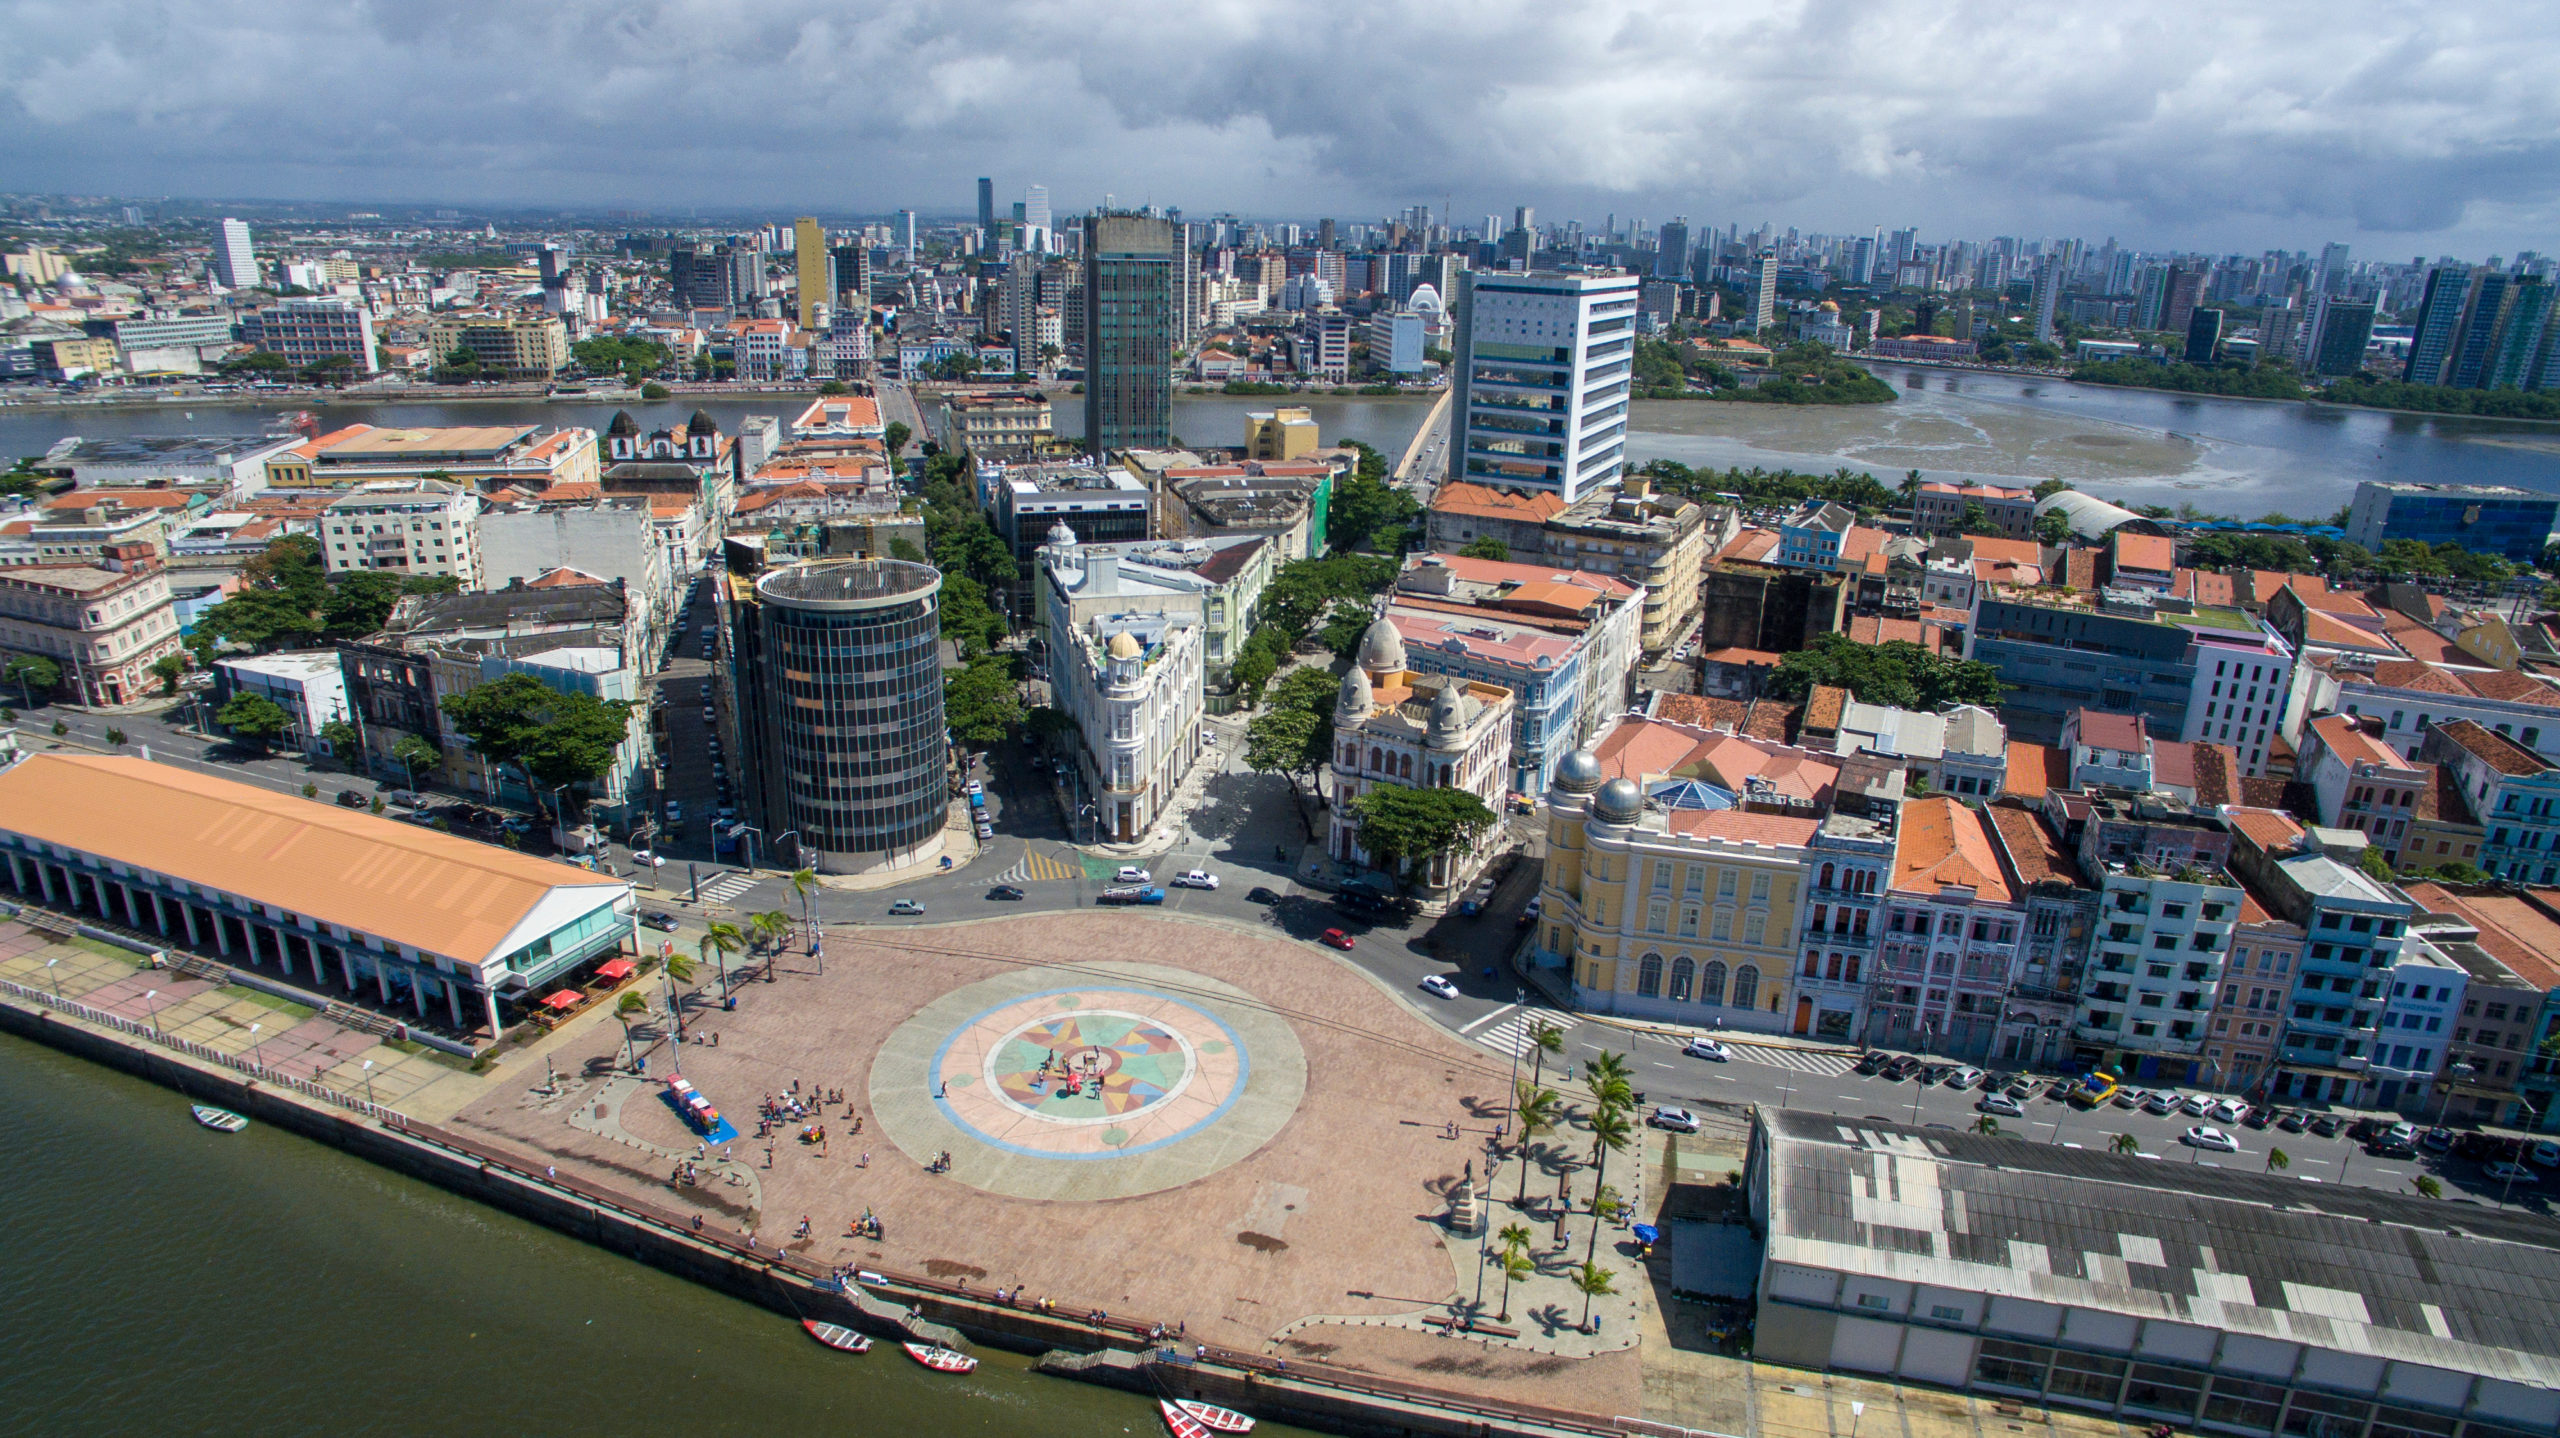 Skyline from the city of Recife Brazil from above